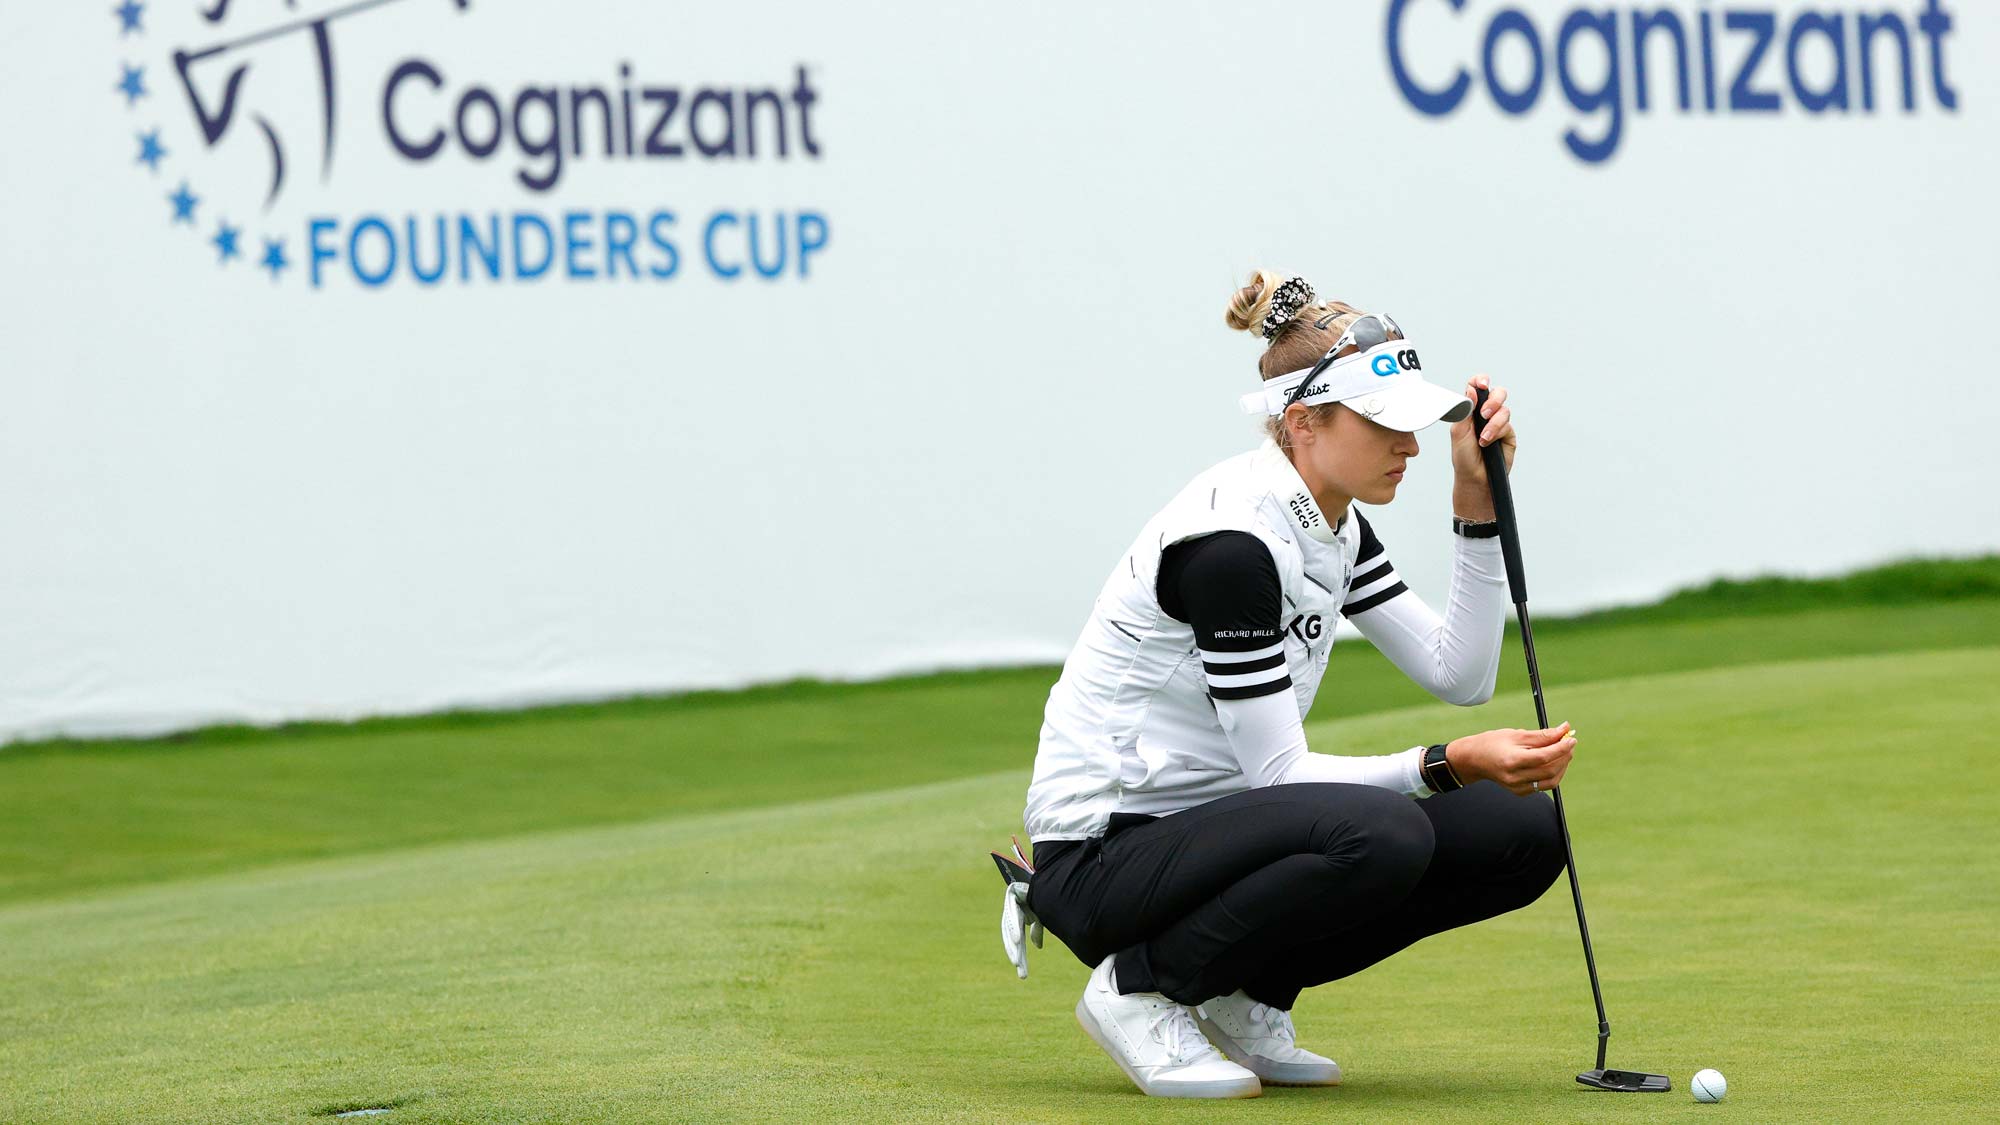 Nelly Korda of the United States lines up her shot on the 18th green during the third round of the Cognizant Founders Cup